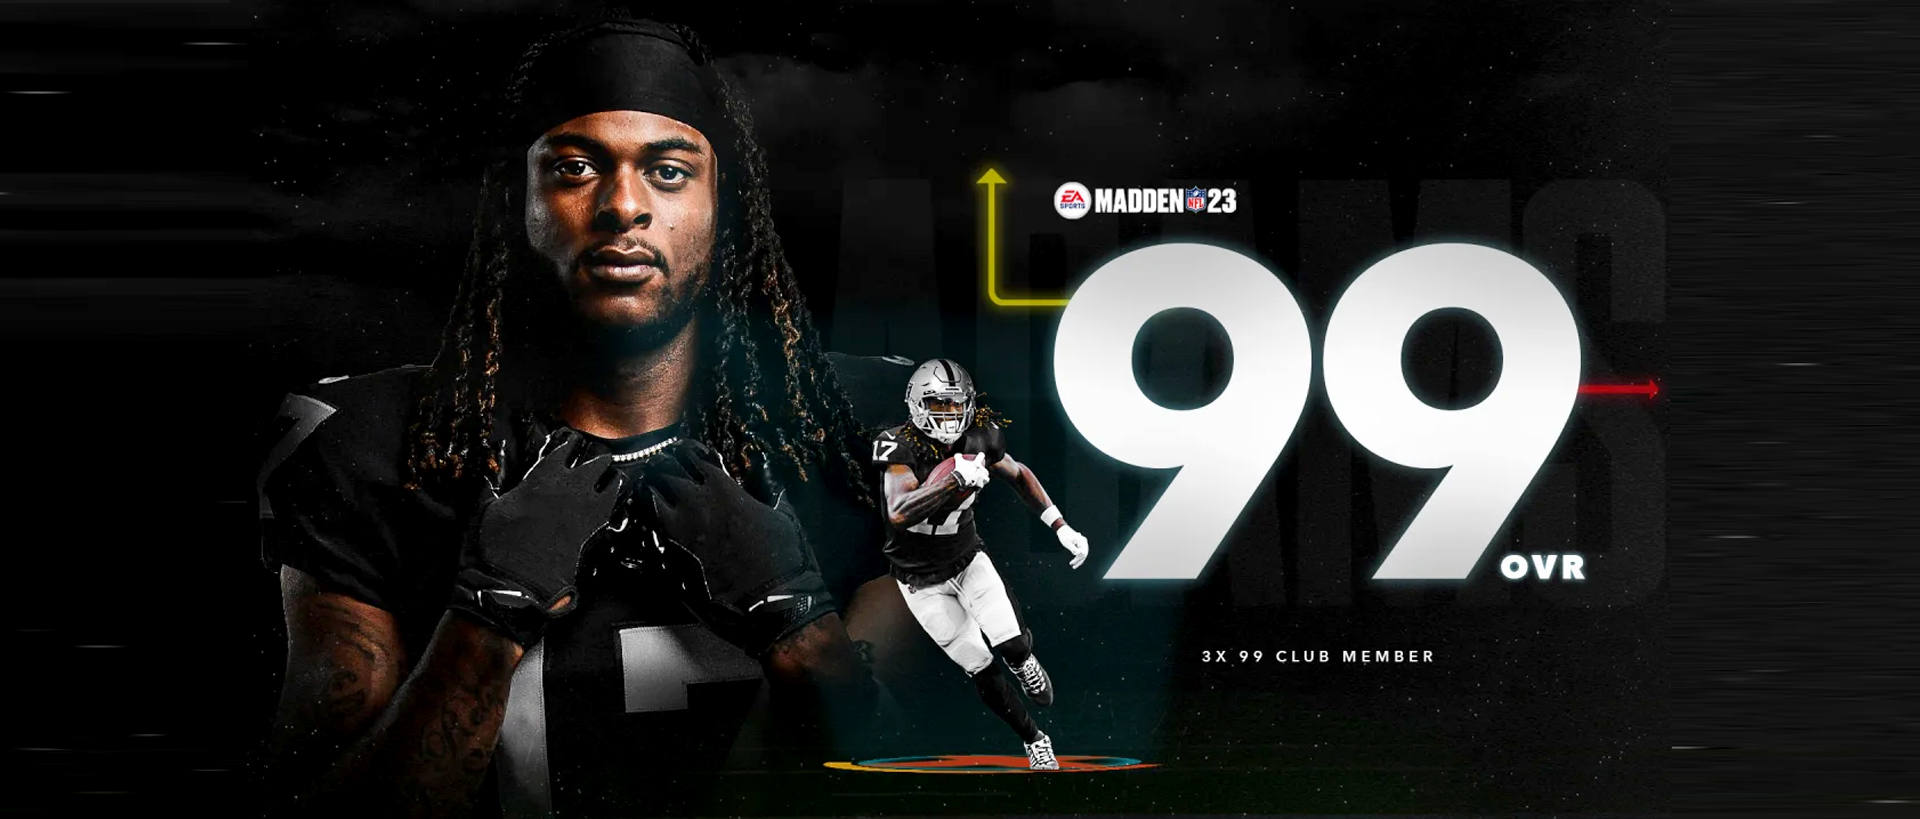 Madden NFL 23 ratings and rankings - The best players for the 2022